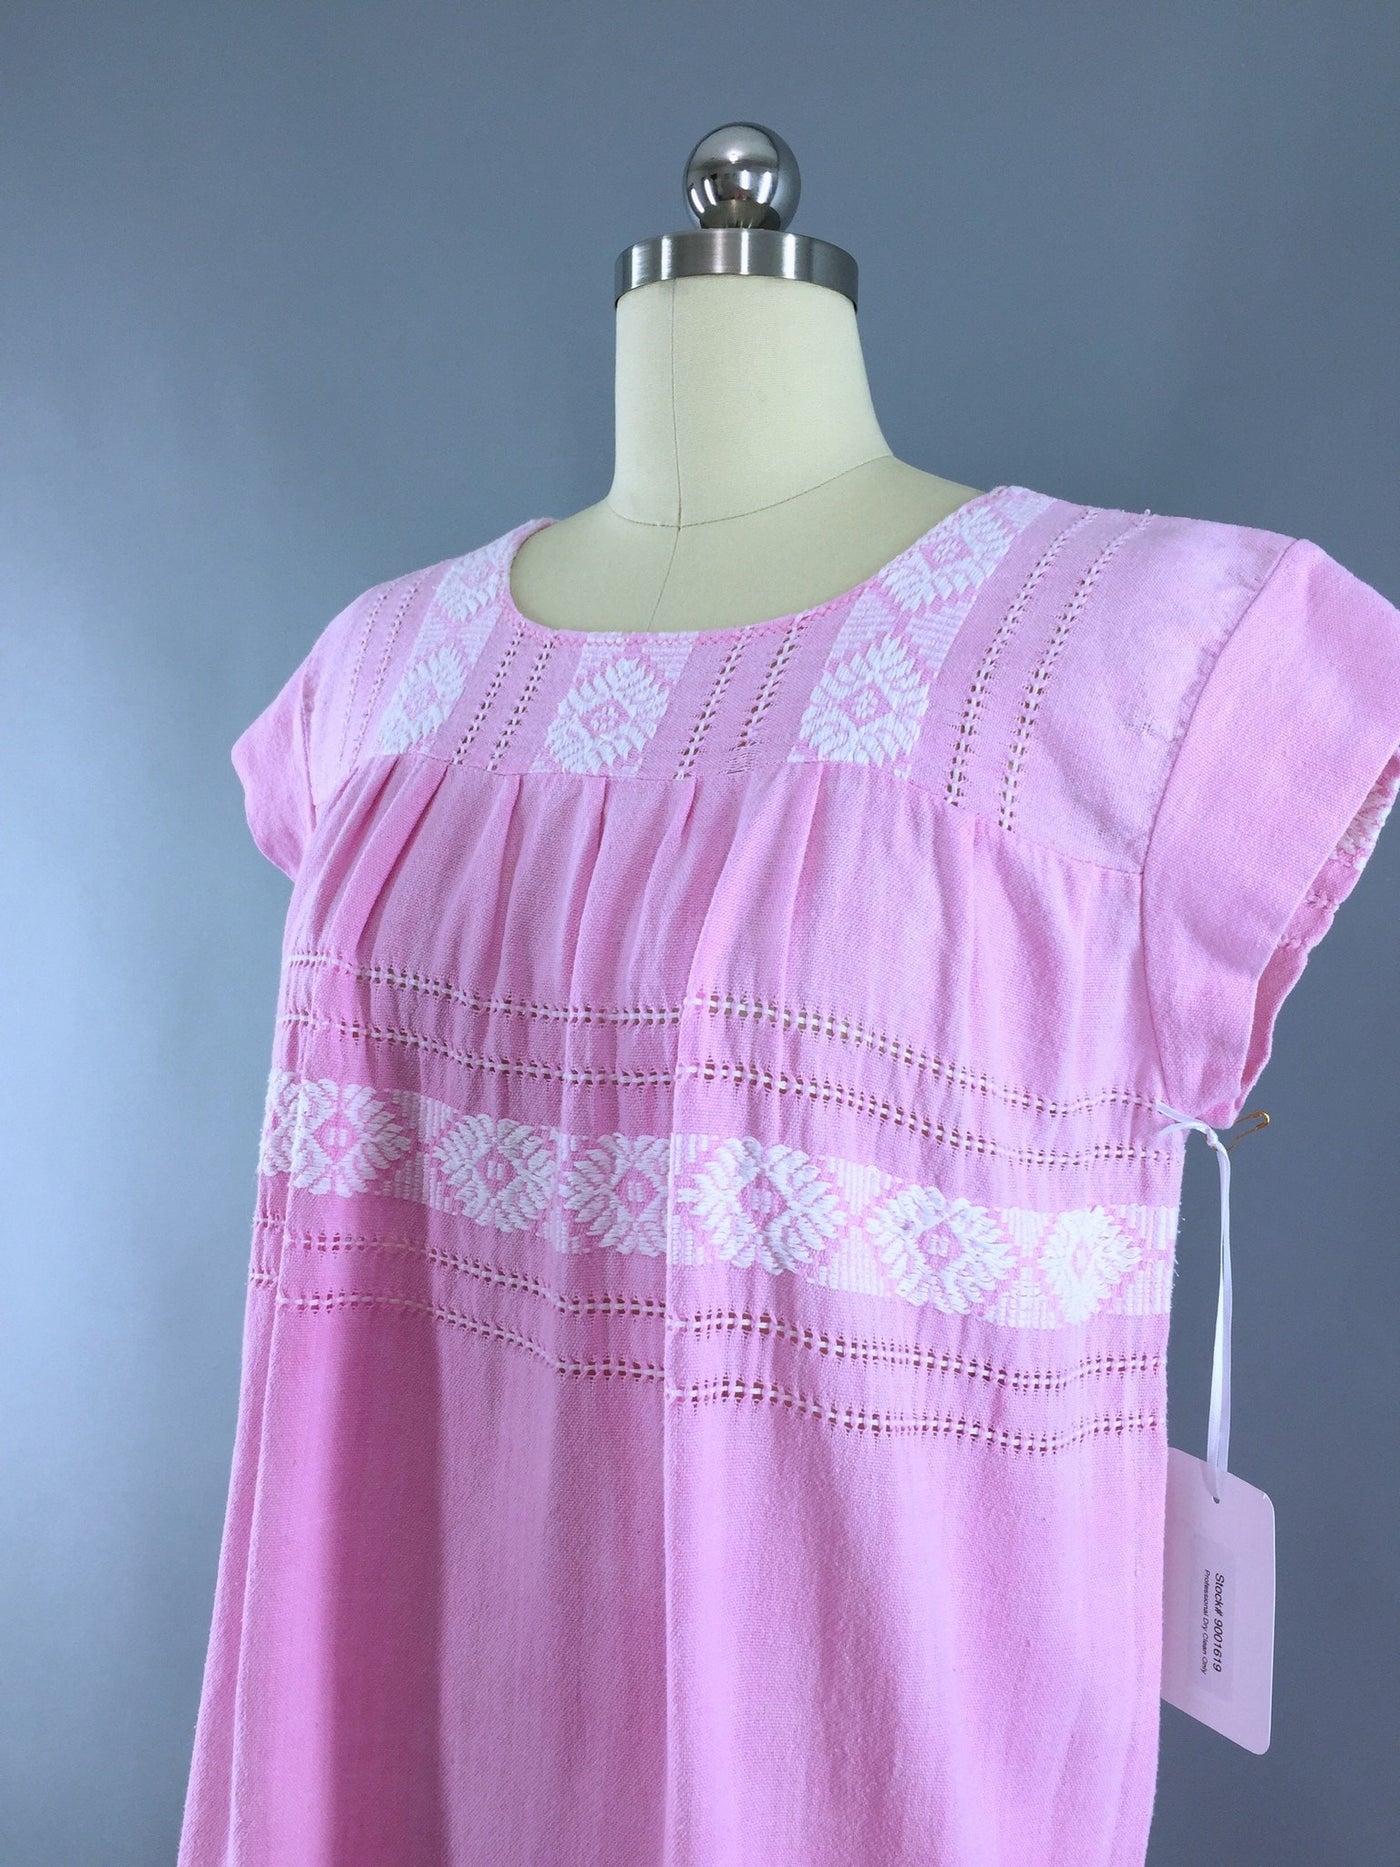 Vintage 1970s Mexican Dress / Pastel Pink Cotton - ThisBlueBird